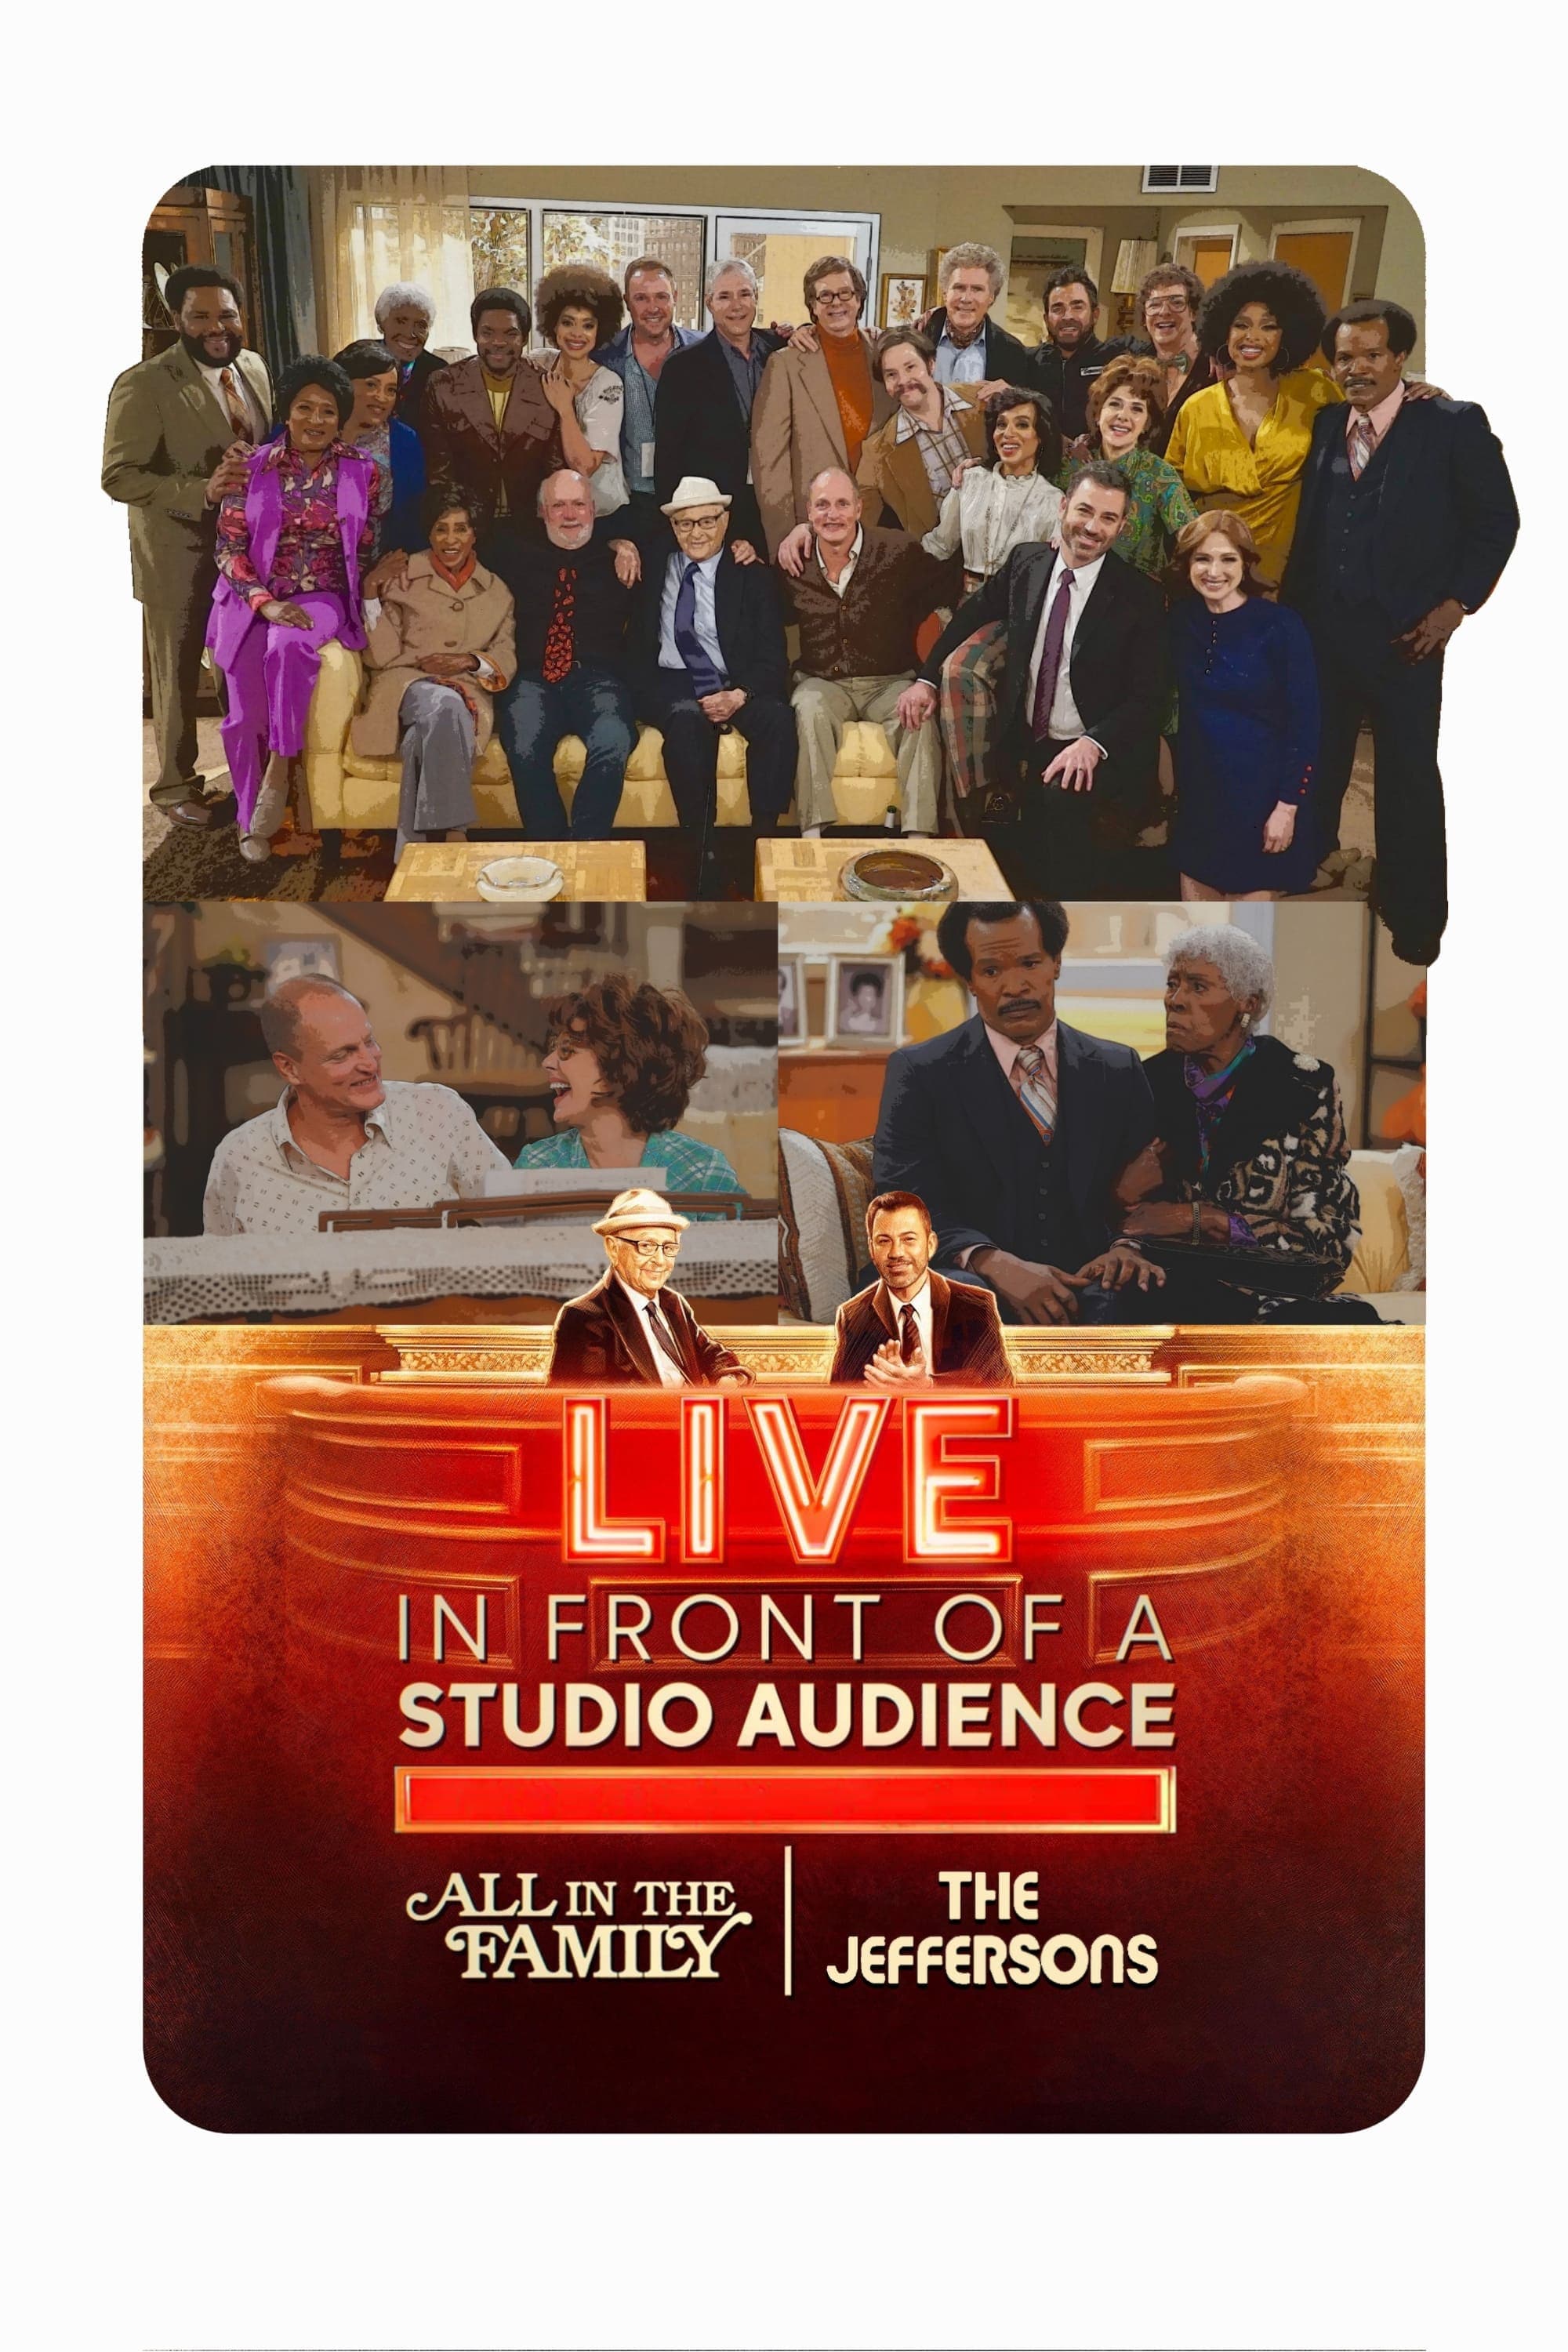 Live in Front of a Studio Audience: Norman Lear's "All in the Family" and "The Jeffersons" (2019)